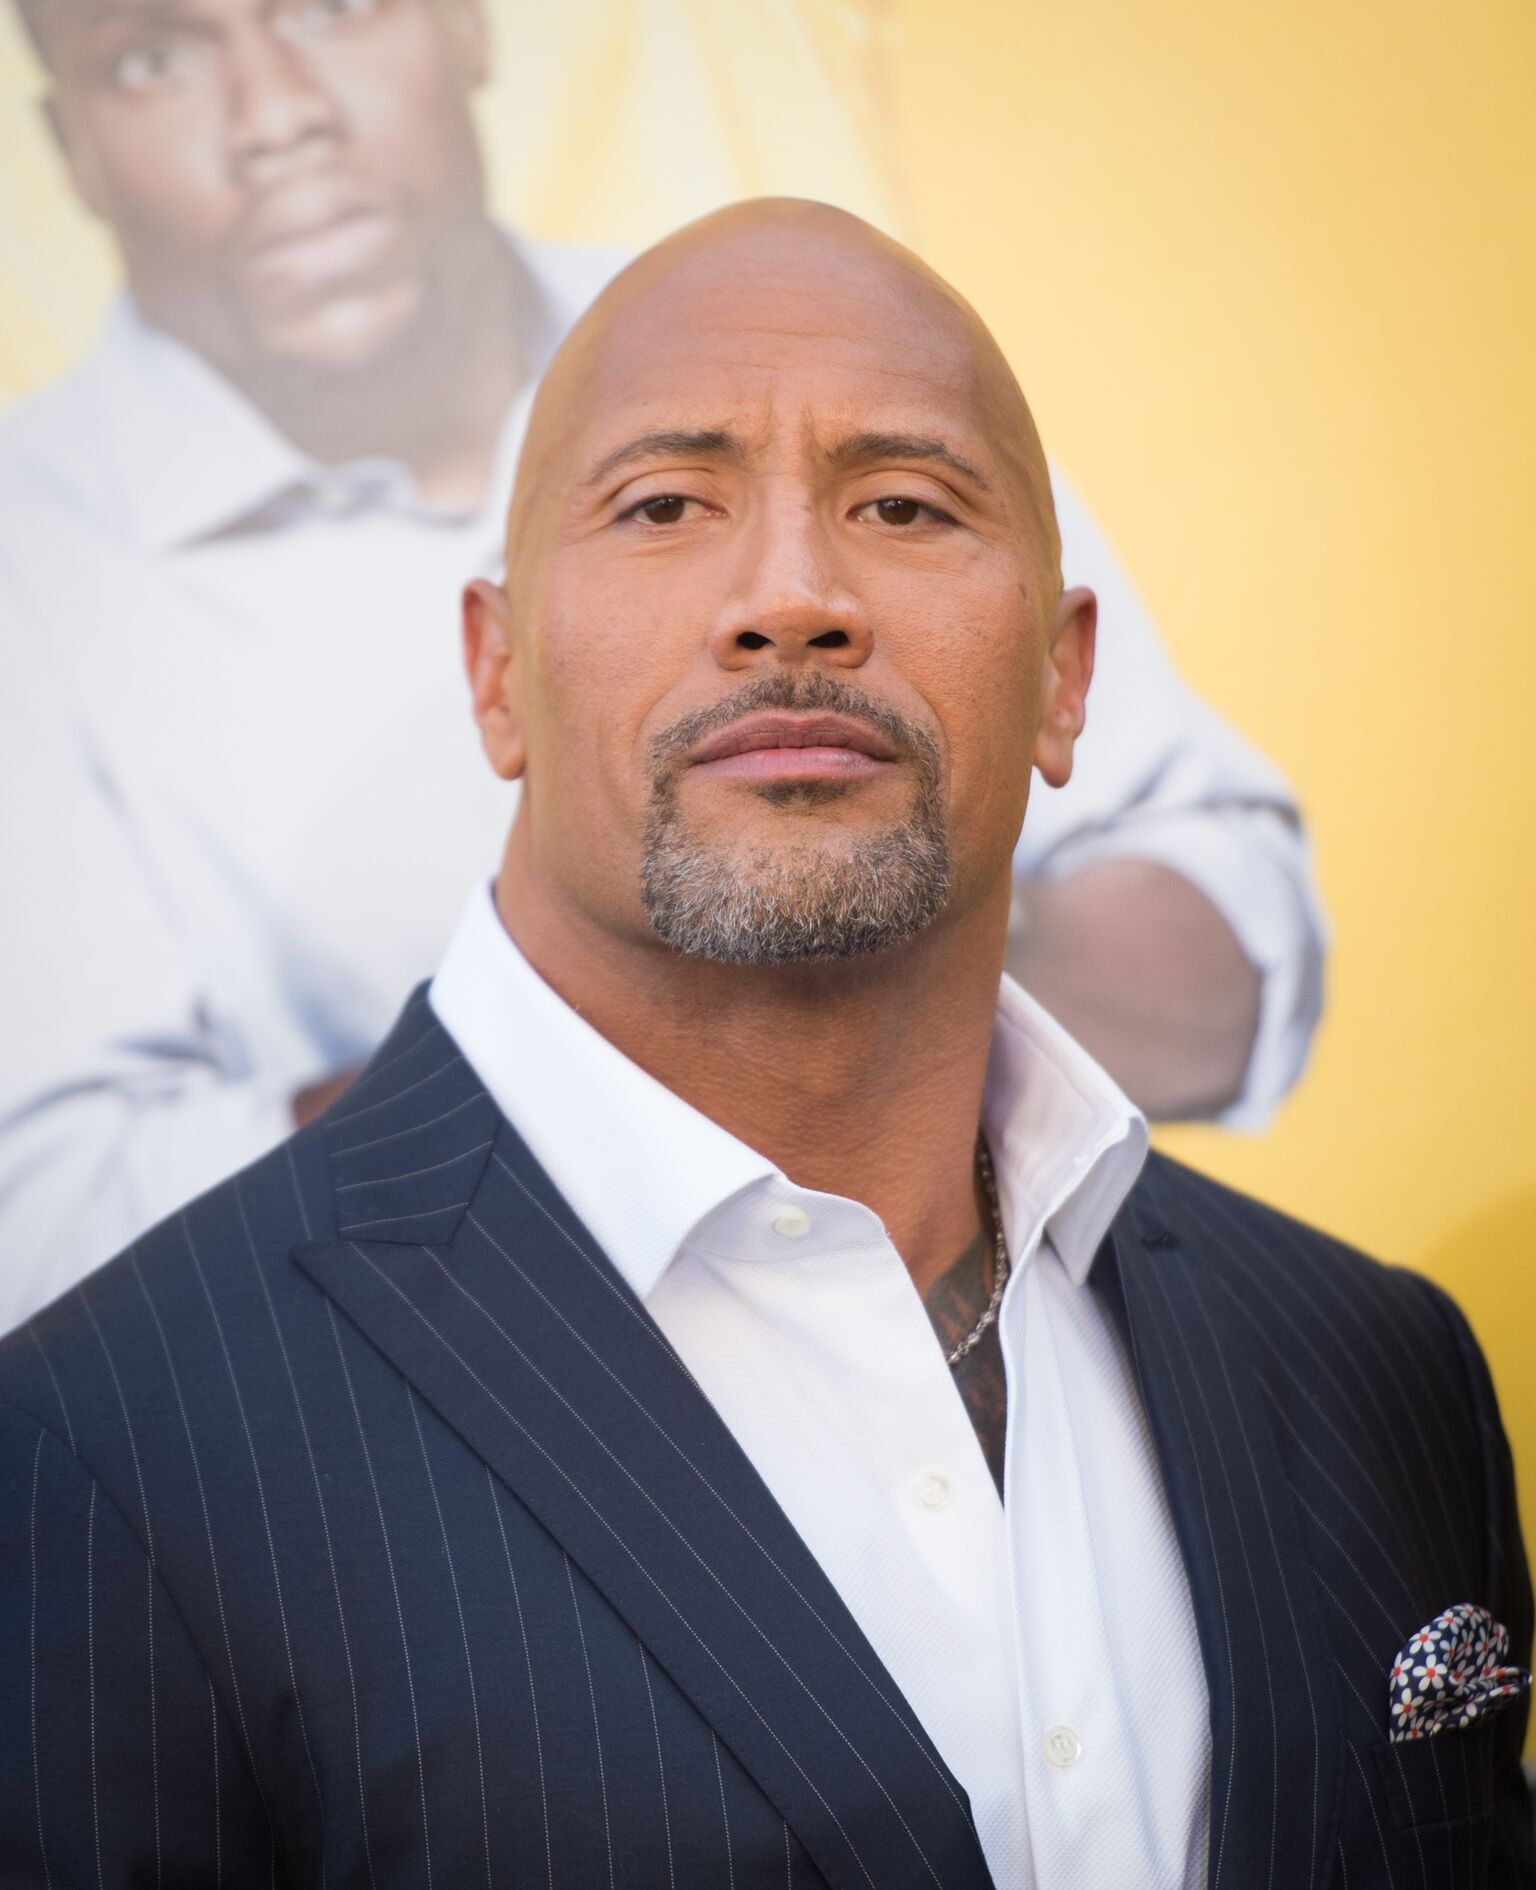 Actor Dwayne Johnson attends the premiere of Warner Bros. Pictures' "Central Intelligence" at Westwood Village Theatre | Getty Images